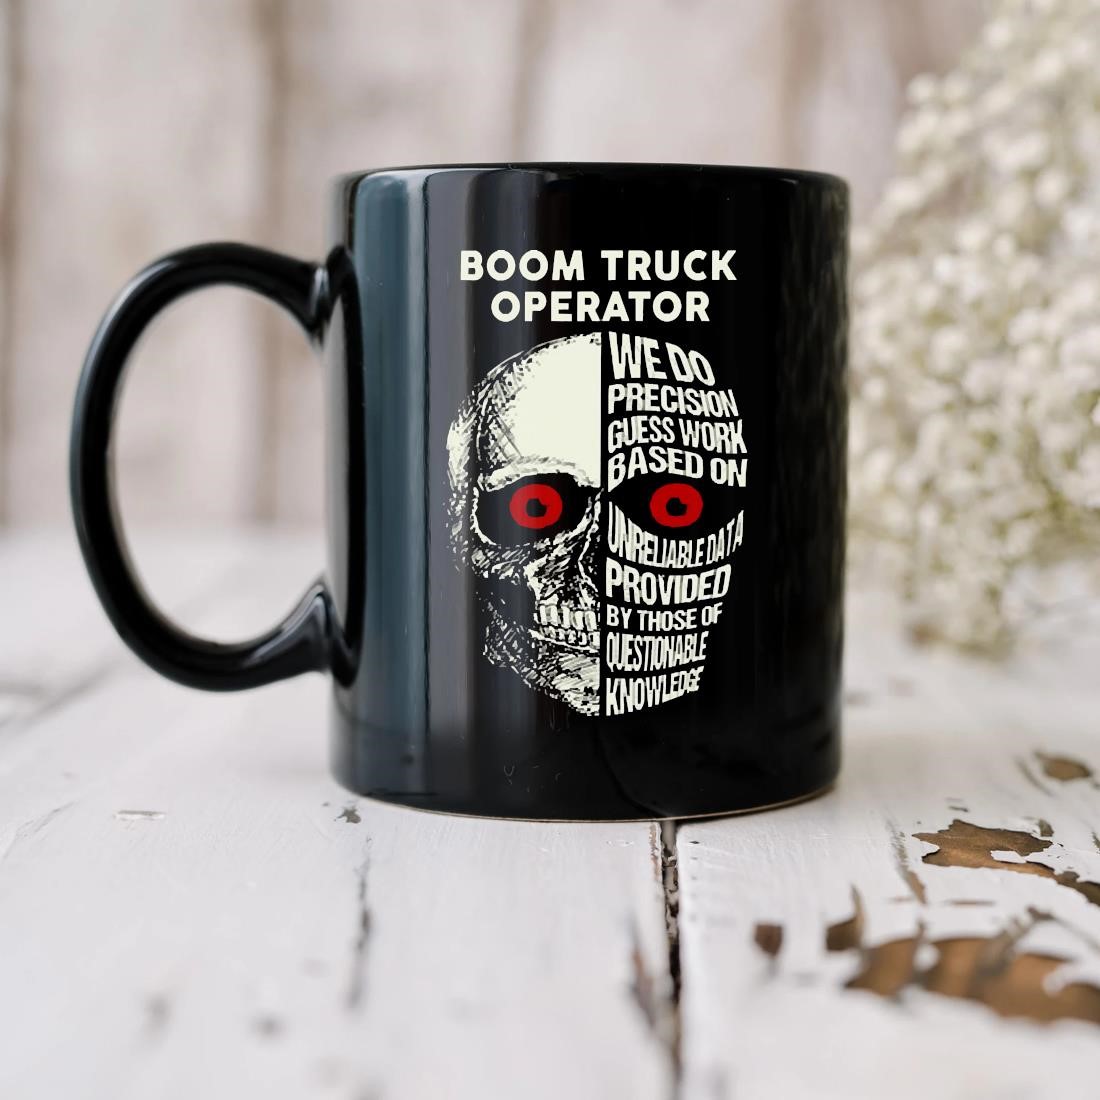 Boom Truck Operator We Do Precision Guess Work Based On Unreliable Data Provided By Those Of Questionable Knowledge Skull Mug biu.jpg